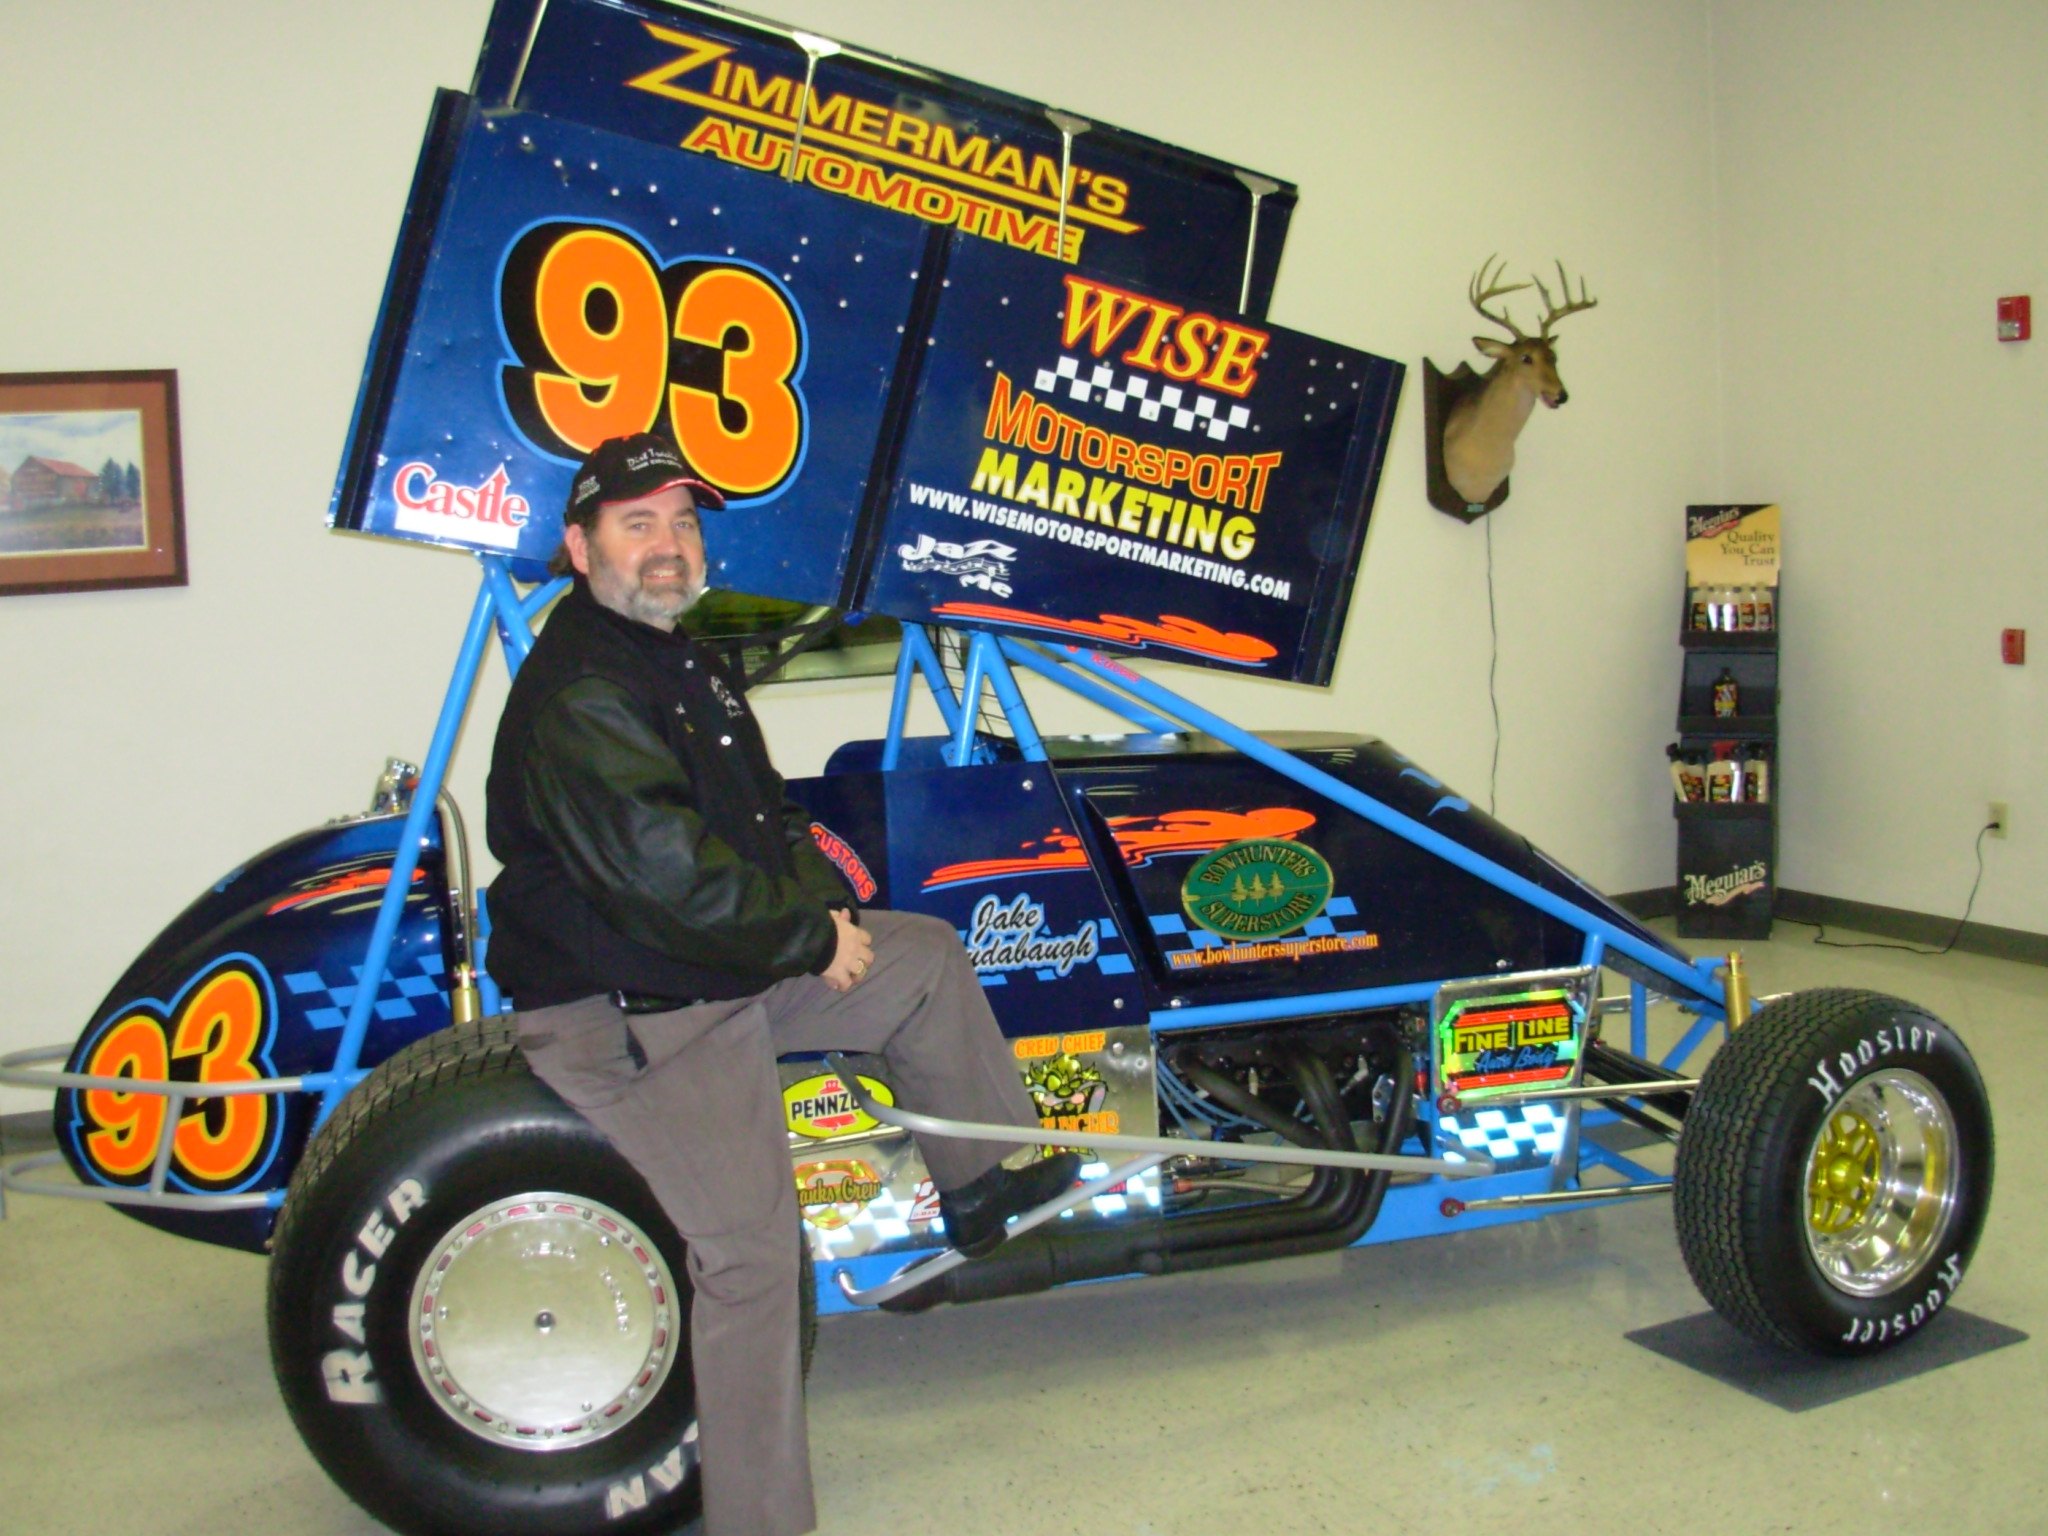 Jake the Snake Raudabaugh will be driving this car in 2007
Super Sportsman owned by Hall of Famer Walt Bigler
